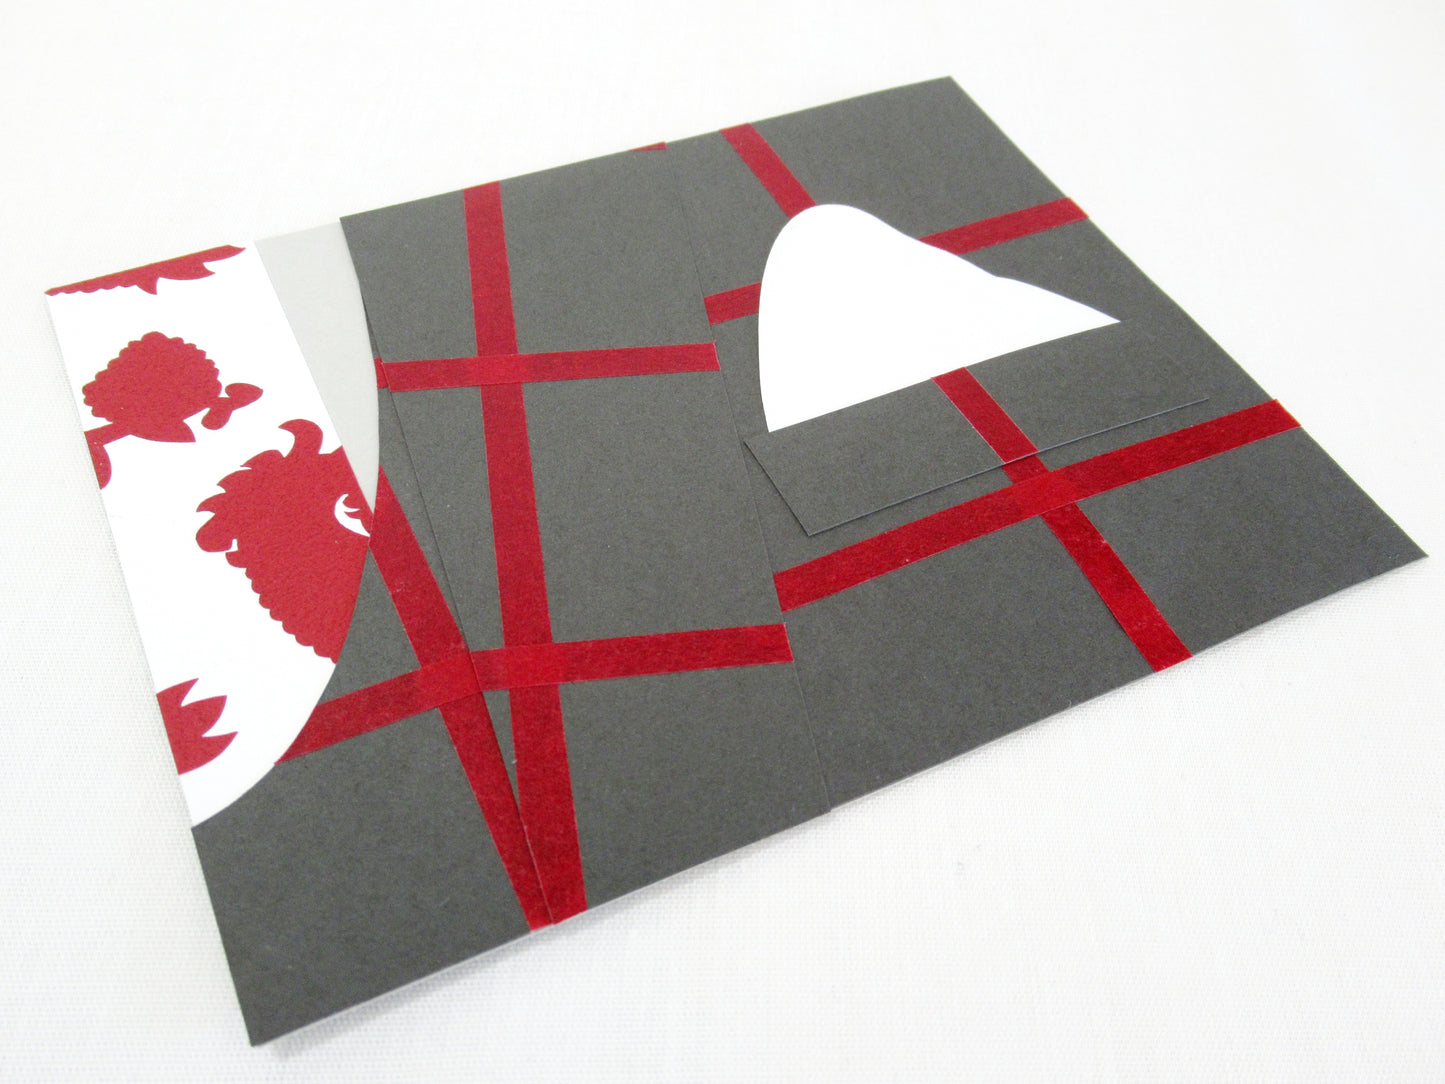 A card lays a white desk. The front of the card looks like a portion of person's suit, their tie and coat. The coat is dark grey with red stripes to form a check pattern. The tie is white with a red paisley pattern. Their is a white pocket square tucked into the pocket. The whole outfit is designed to look like one worn by Hannibal Lecter in the NBC show Hannibal.